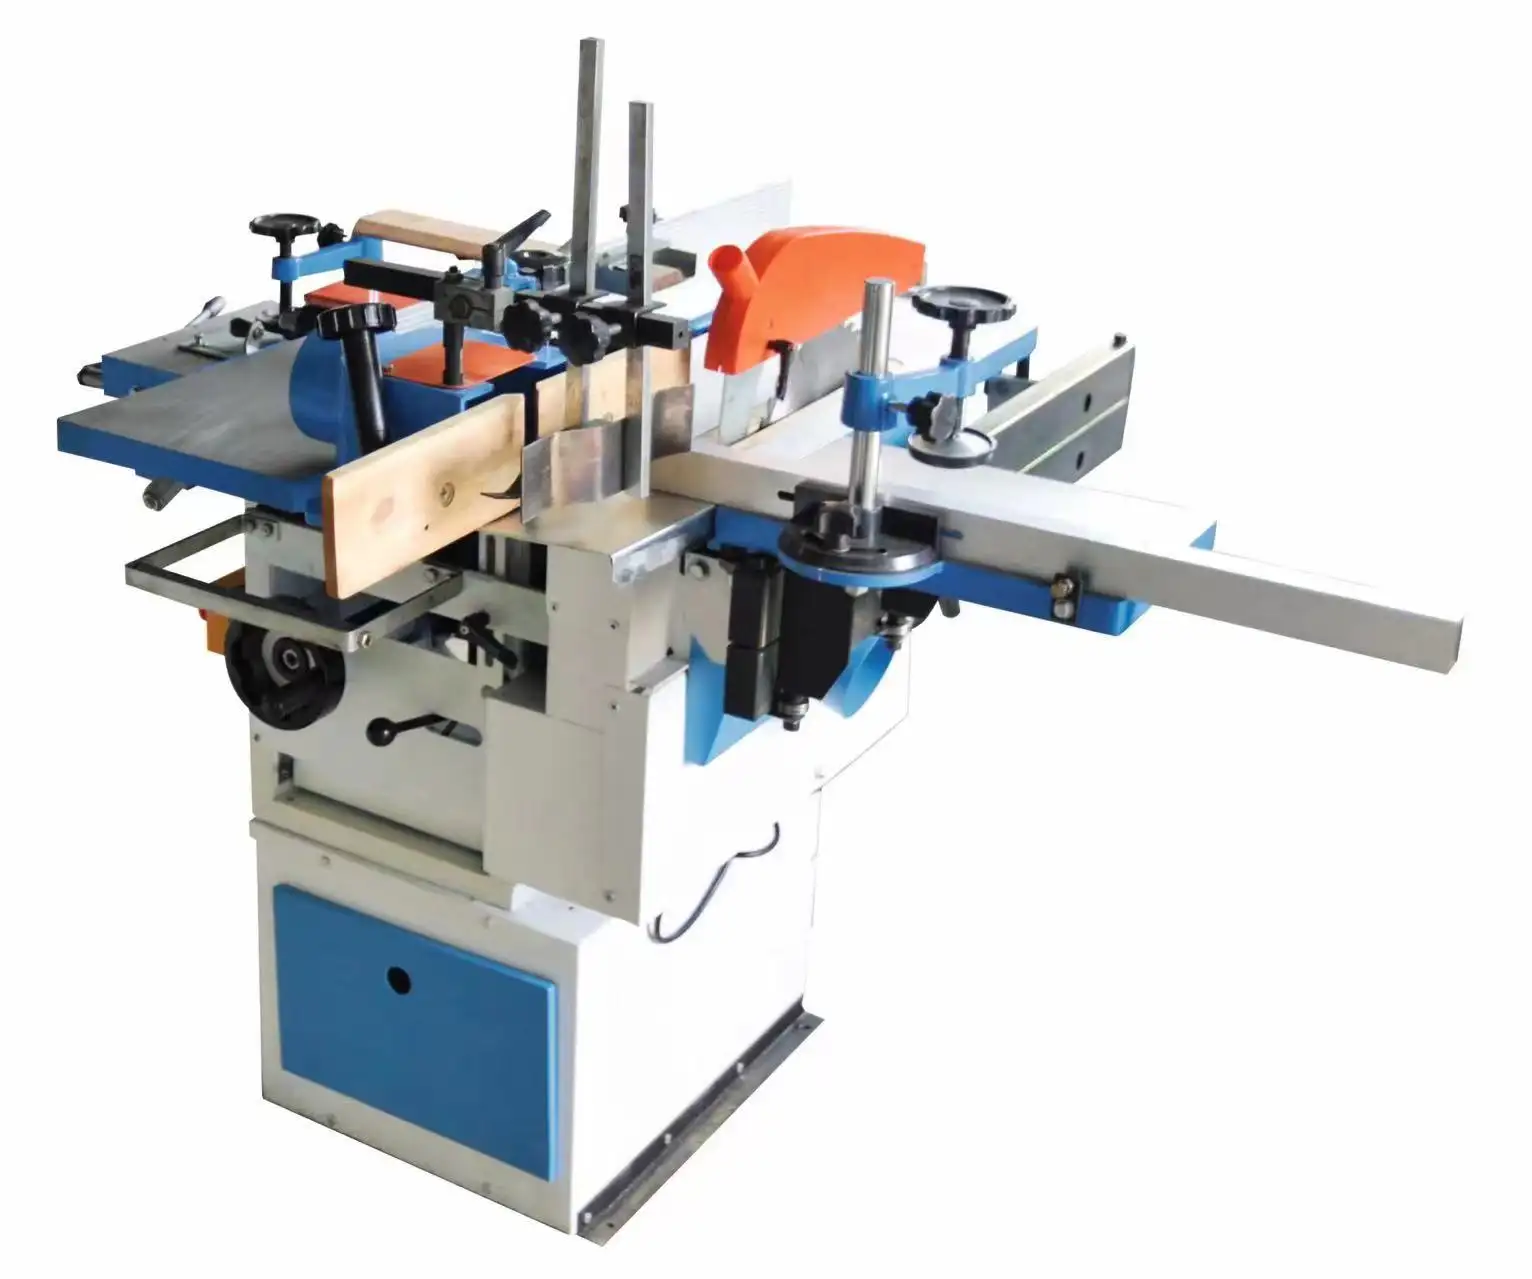 The latest style high-power, high-efficiency woodworking combined desktop machine tool with multiple functions panel saw machine